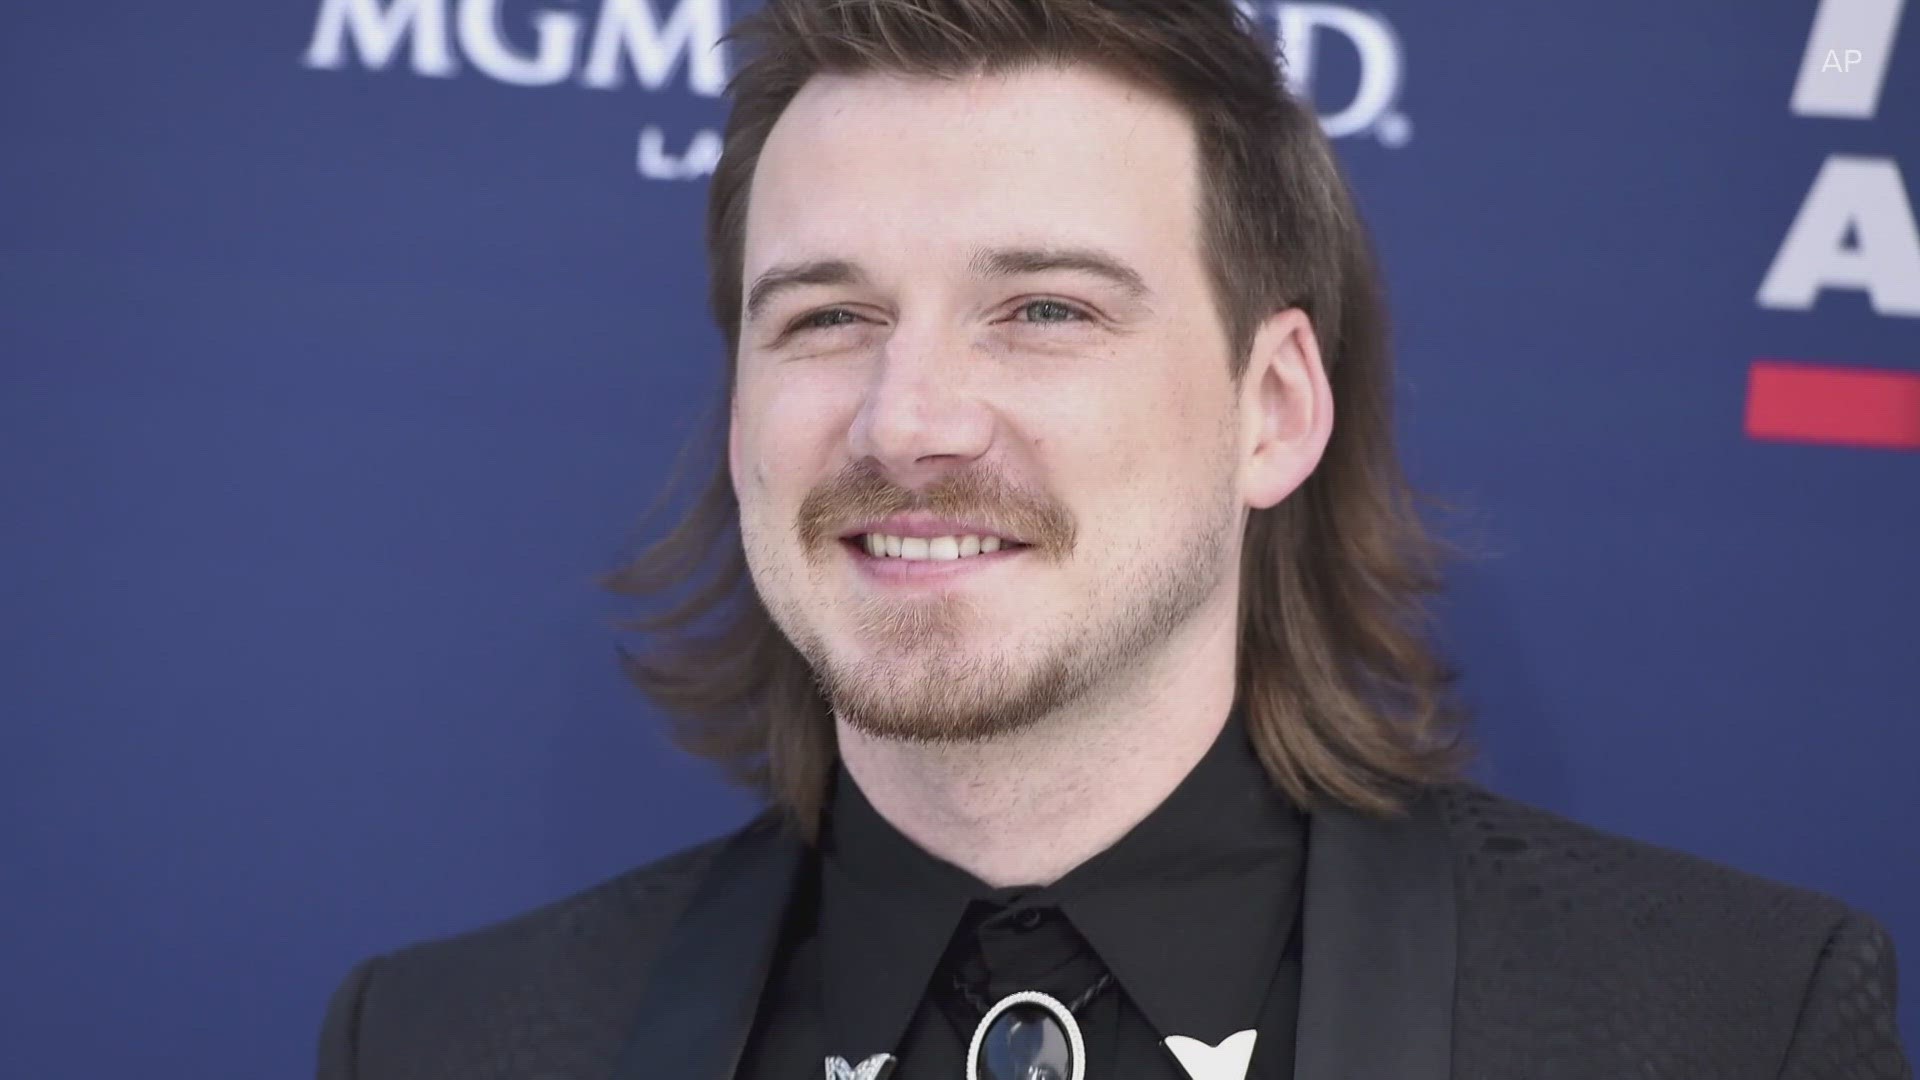 Country music star Morgan Wallen was arrested early Monday morning on felony charges after he allegedly threw a chair from the sixth-floor roof of a Nashville bar.